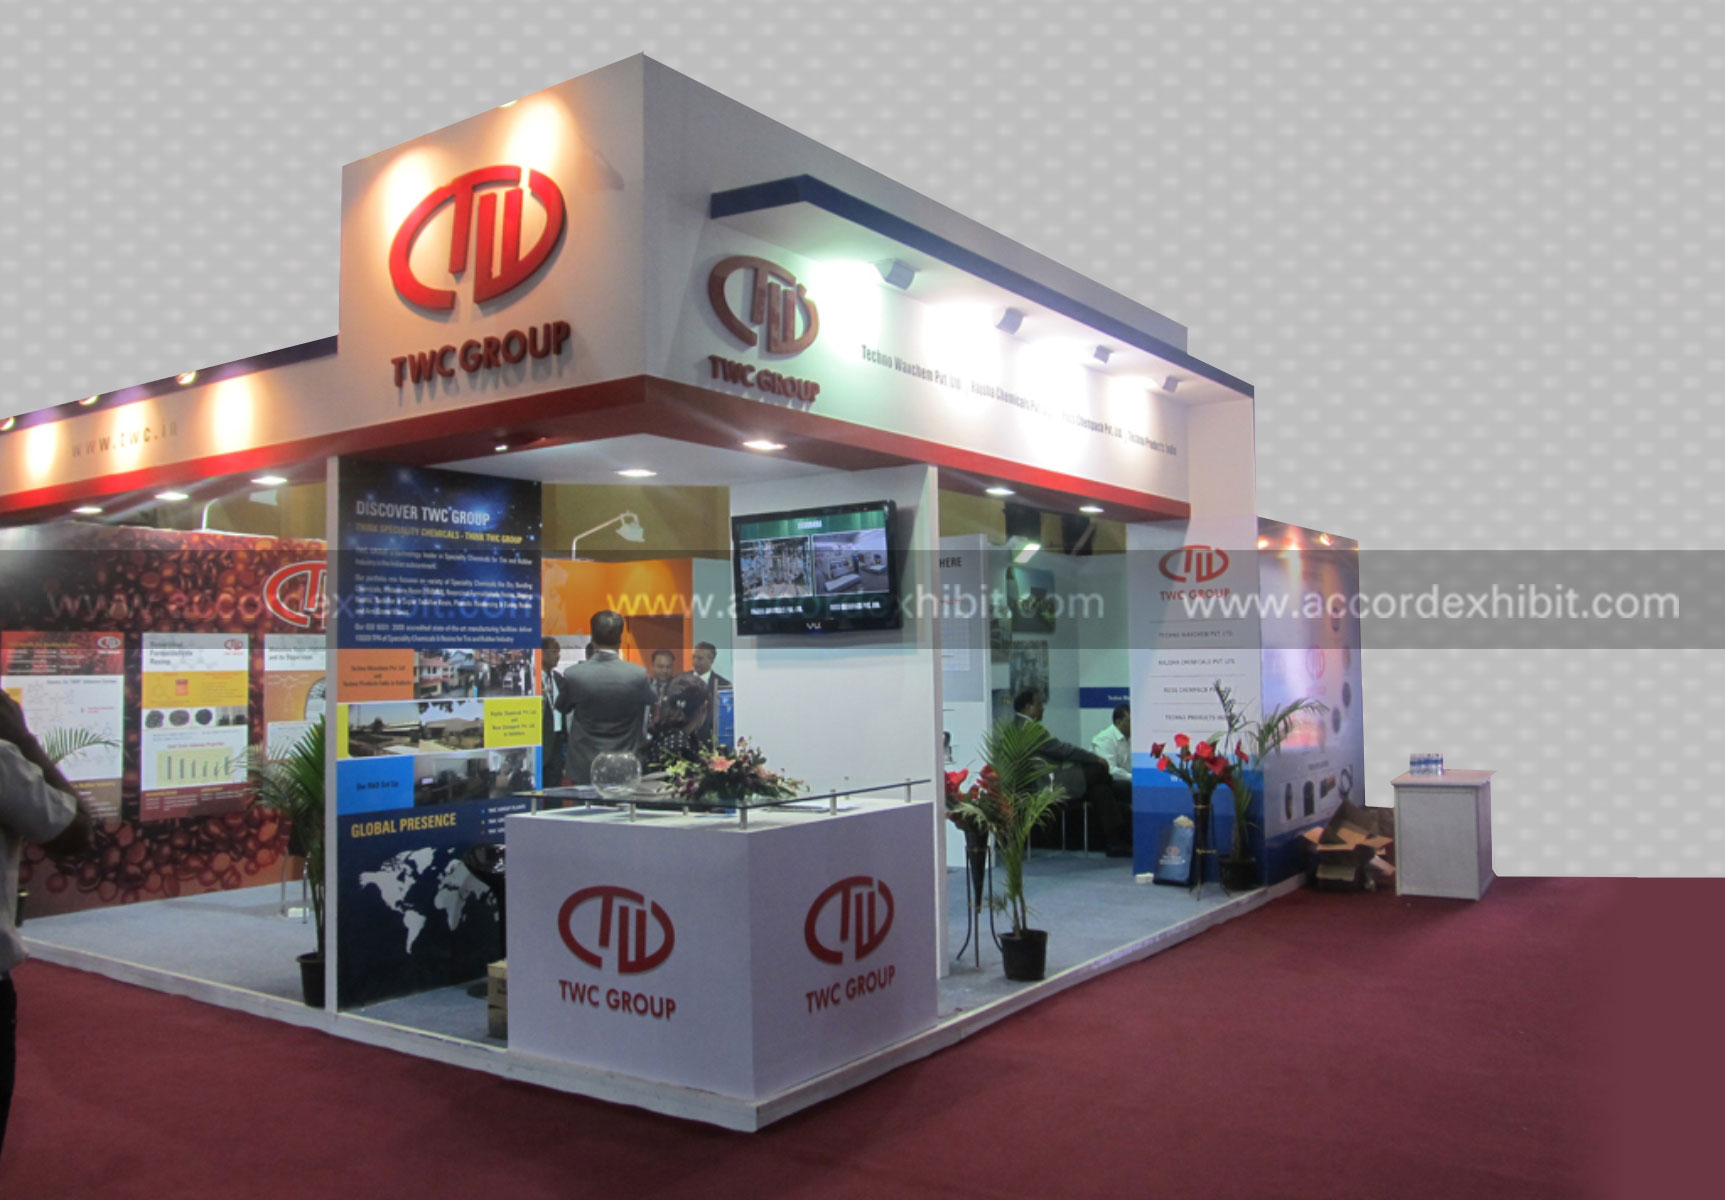 Exhibition Stall for TWC Group